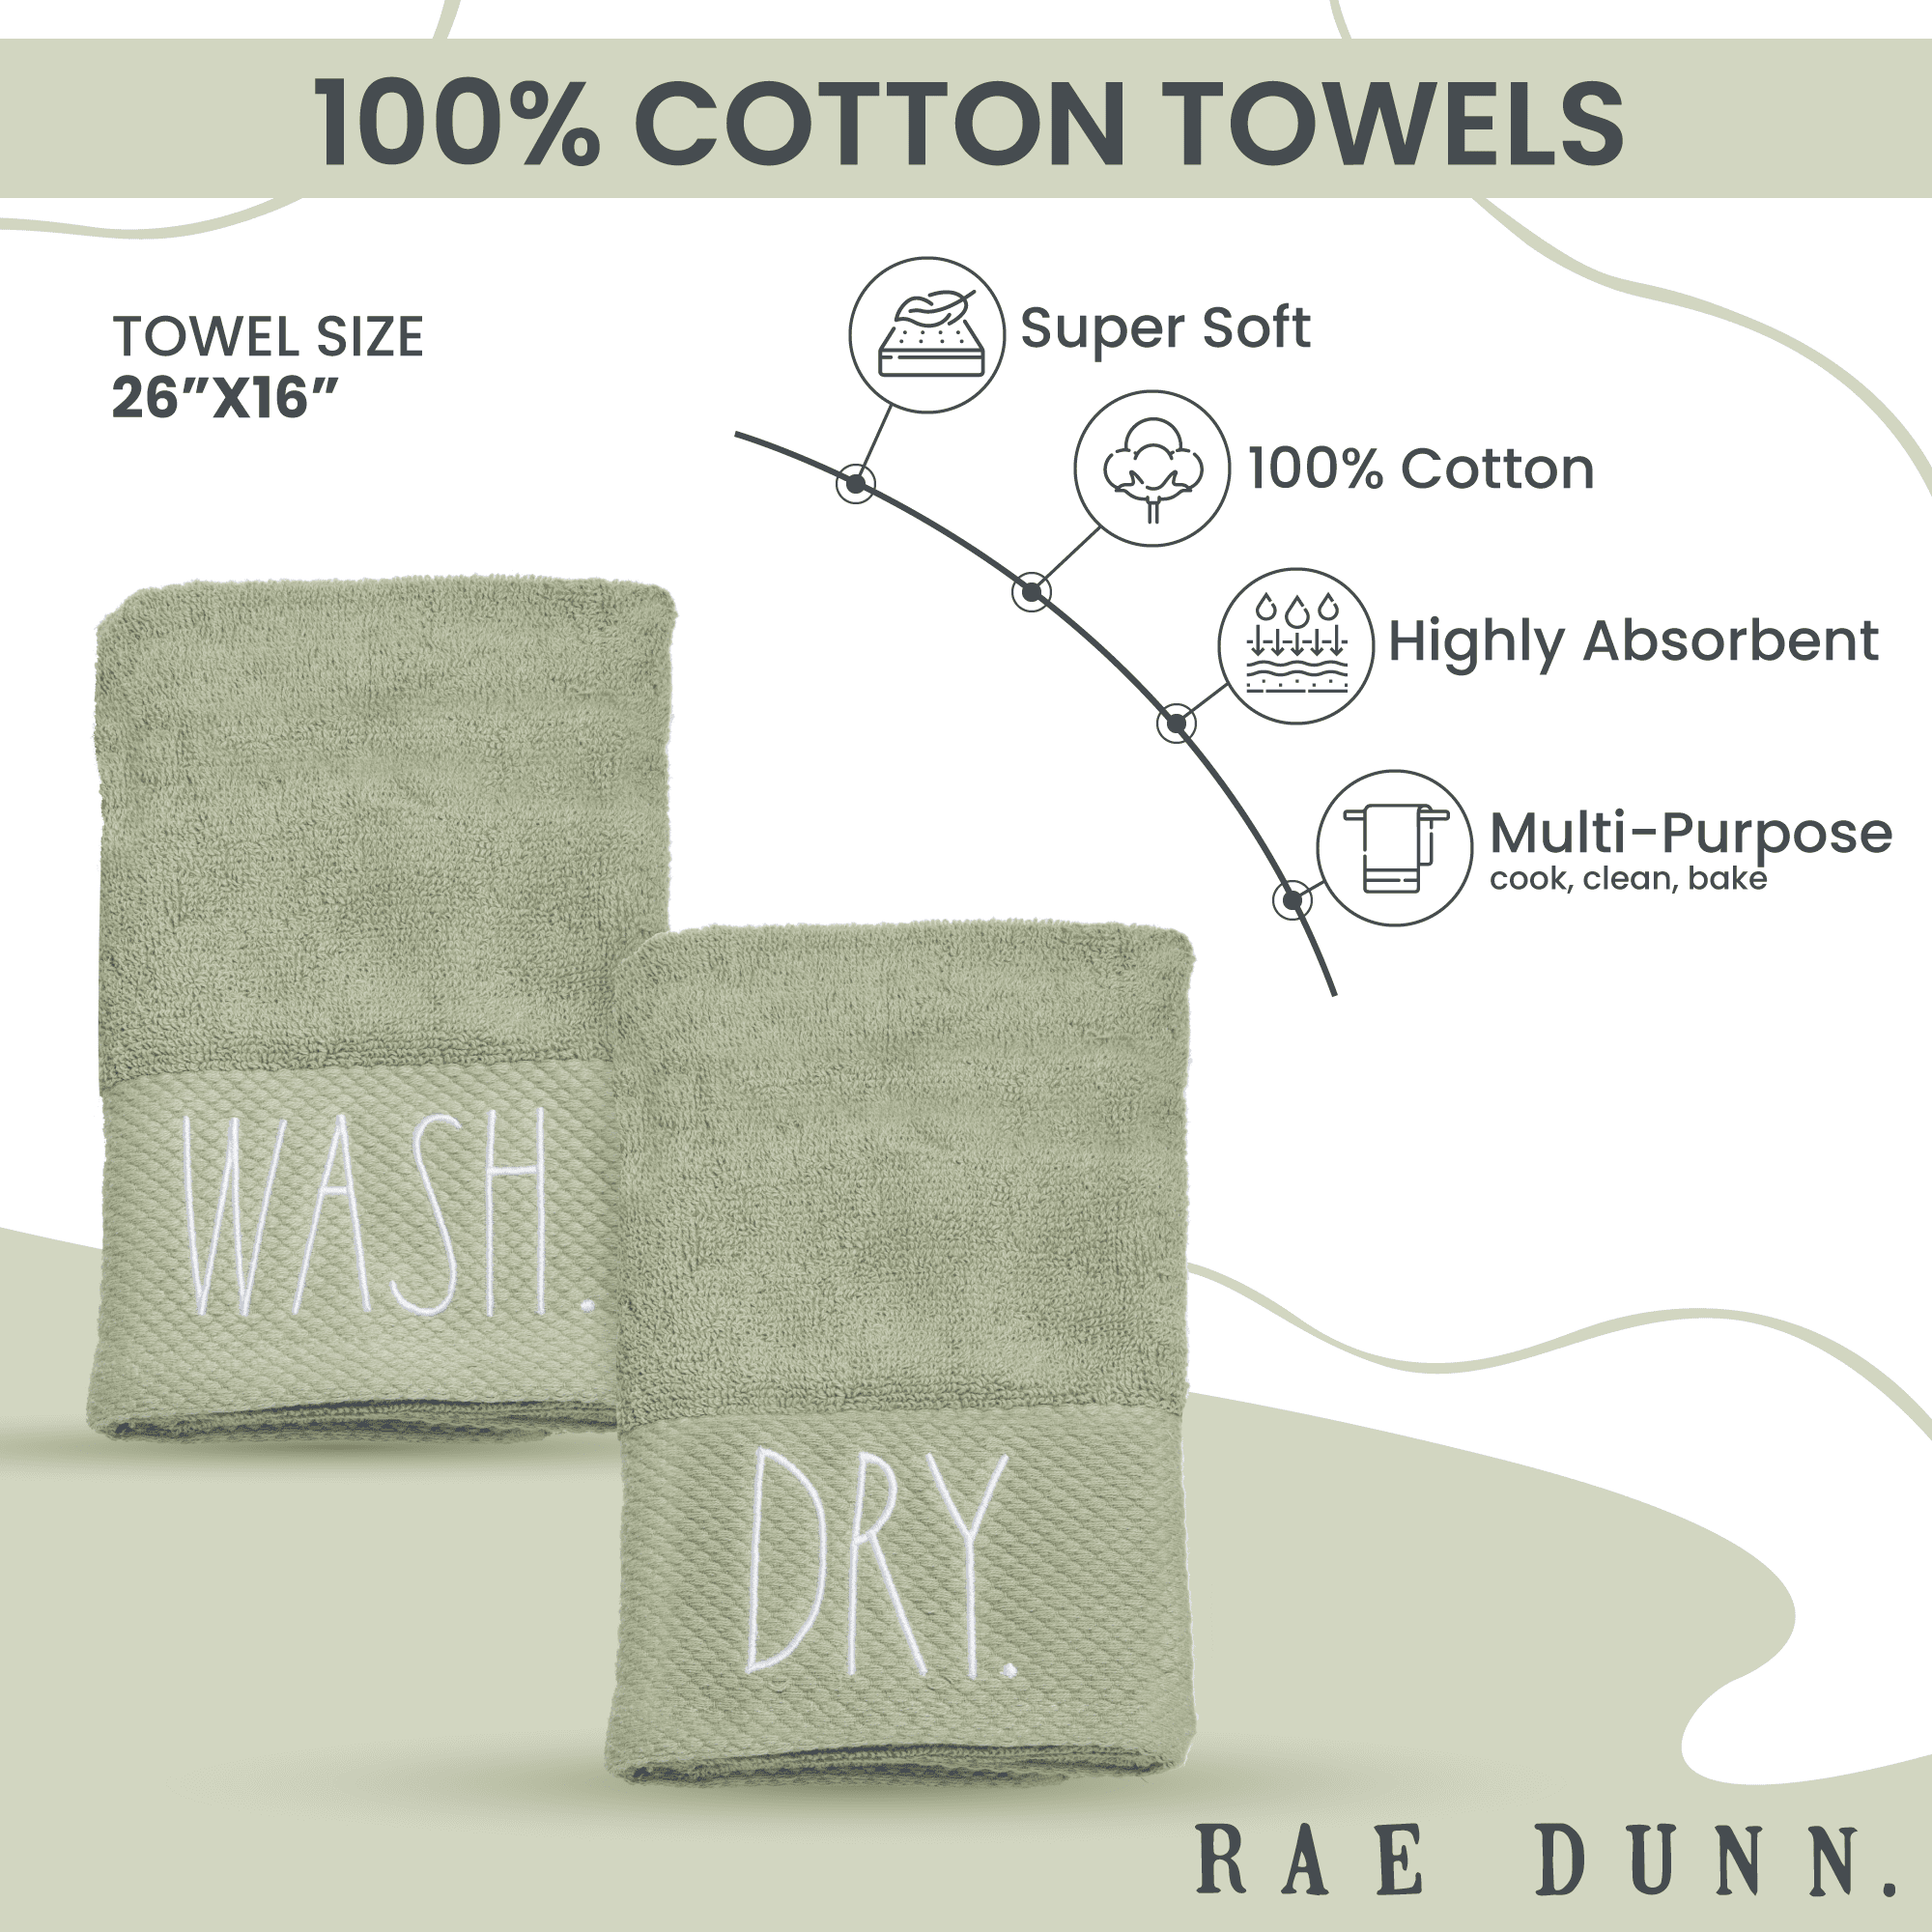 Rae Dunn Hand Towels, Embroidered Decorative Hand Towel for Kitchen and Bathroom, 100% Cotton, Highly Absorbent, 2Pack, 16x26, Embroidered “Trick or